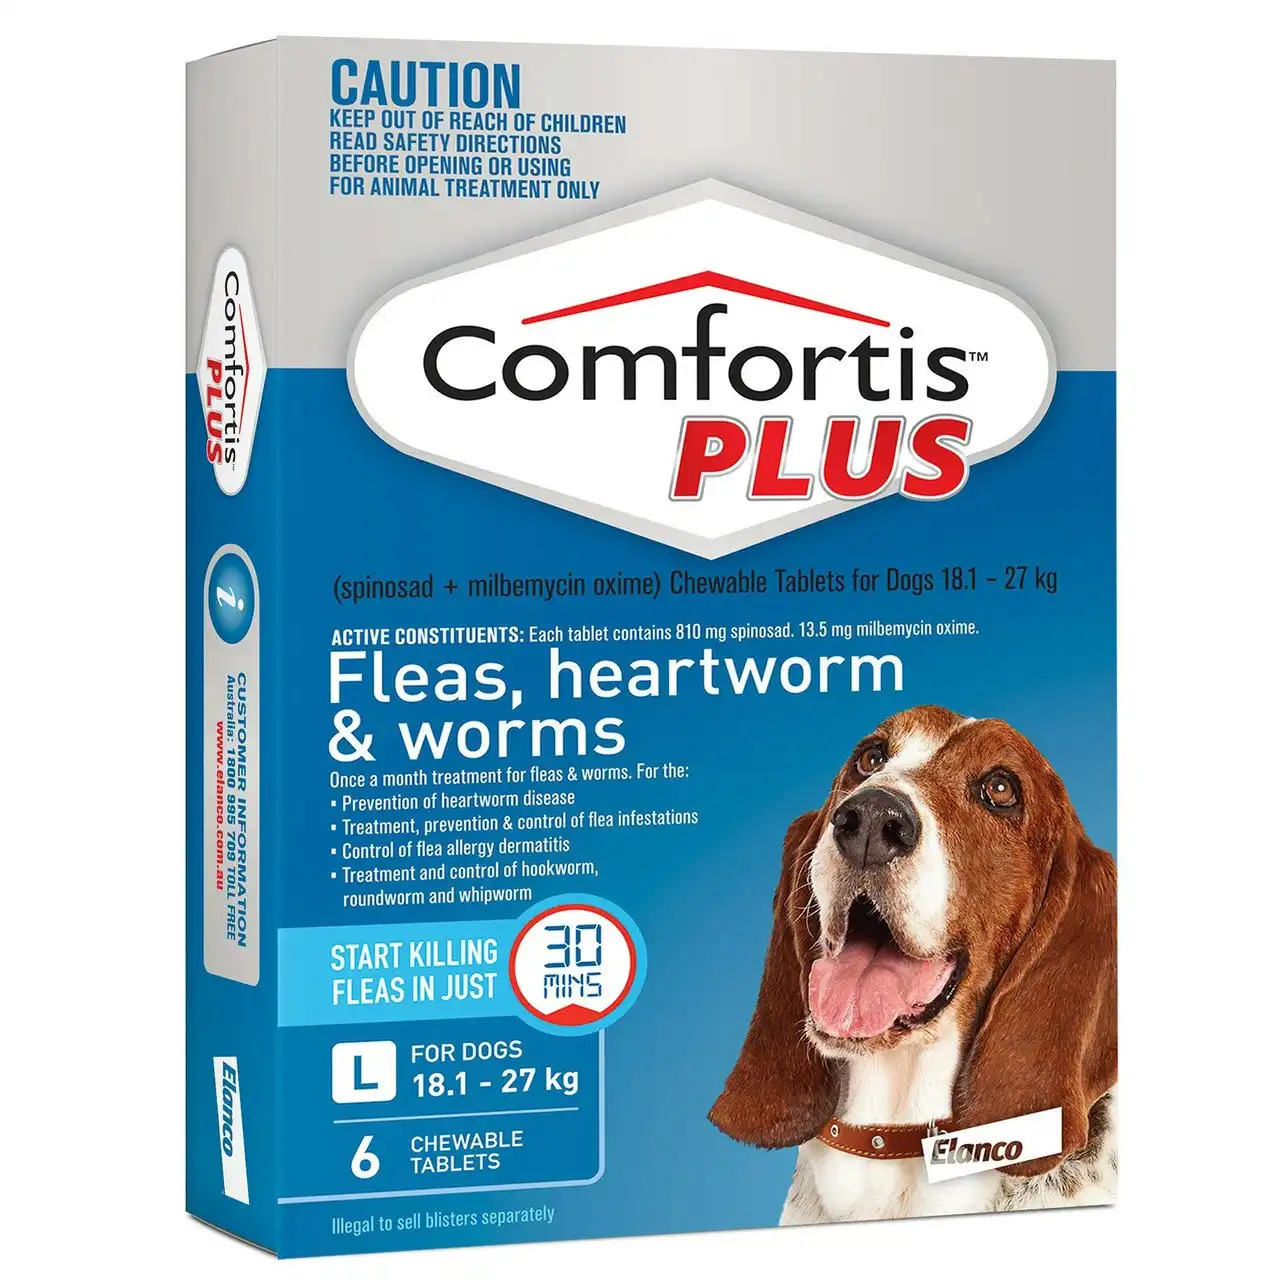 Comfortis(TM) PLUS Fleas, Heartworm & Worms for Dogs 18.1 - 27kg - 6 Pack